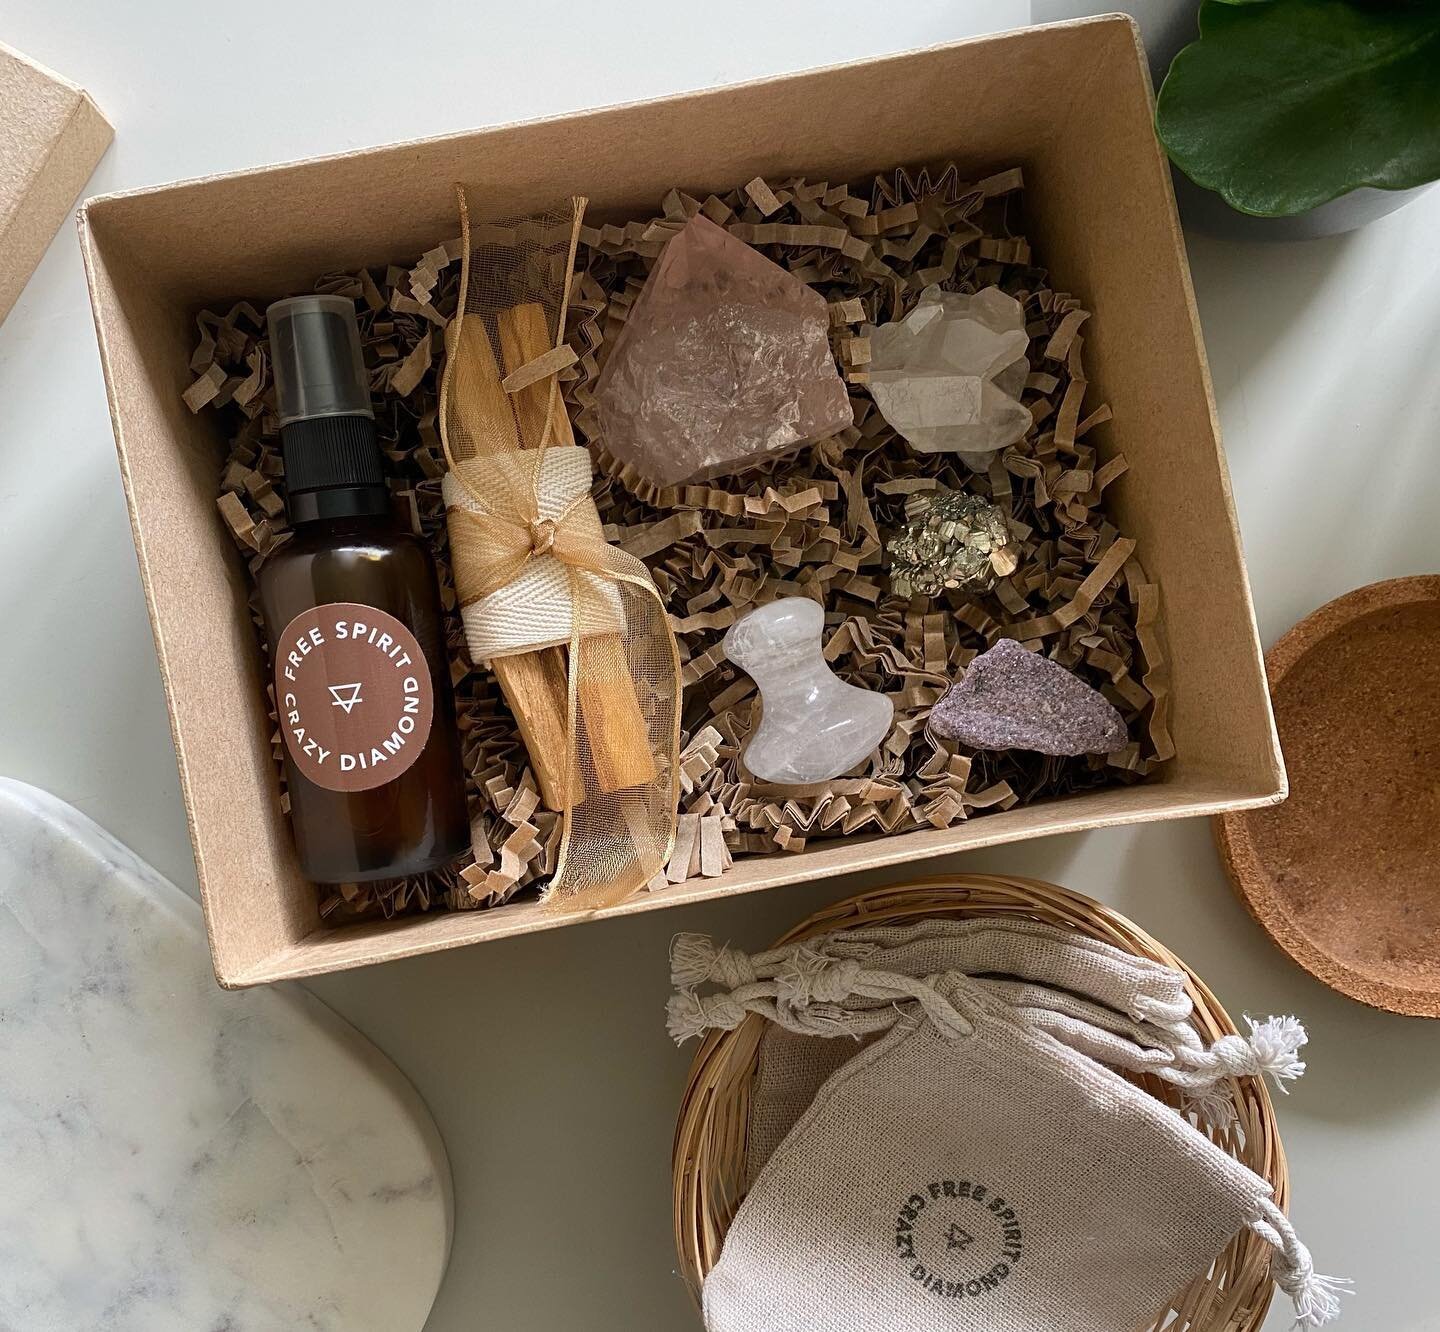 &bull; Nurture yourself with our carefully chosen products, to help you create the sacred space you need to get in touch with your spirituality and relax your mind. 

At Free Spirit Crazy Diamond we believe that the power of crystals and smoke cleans